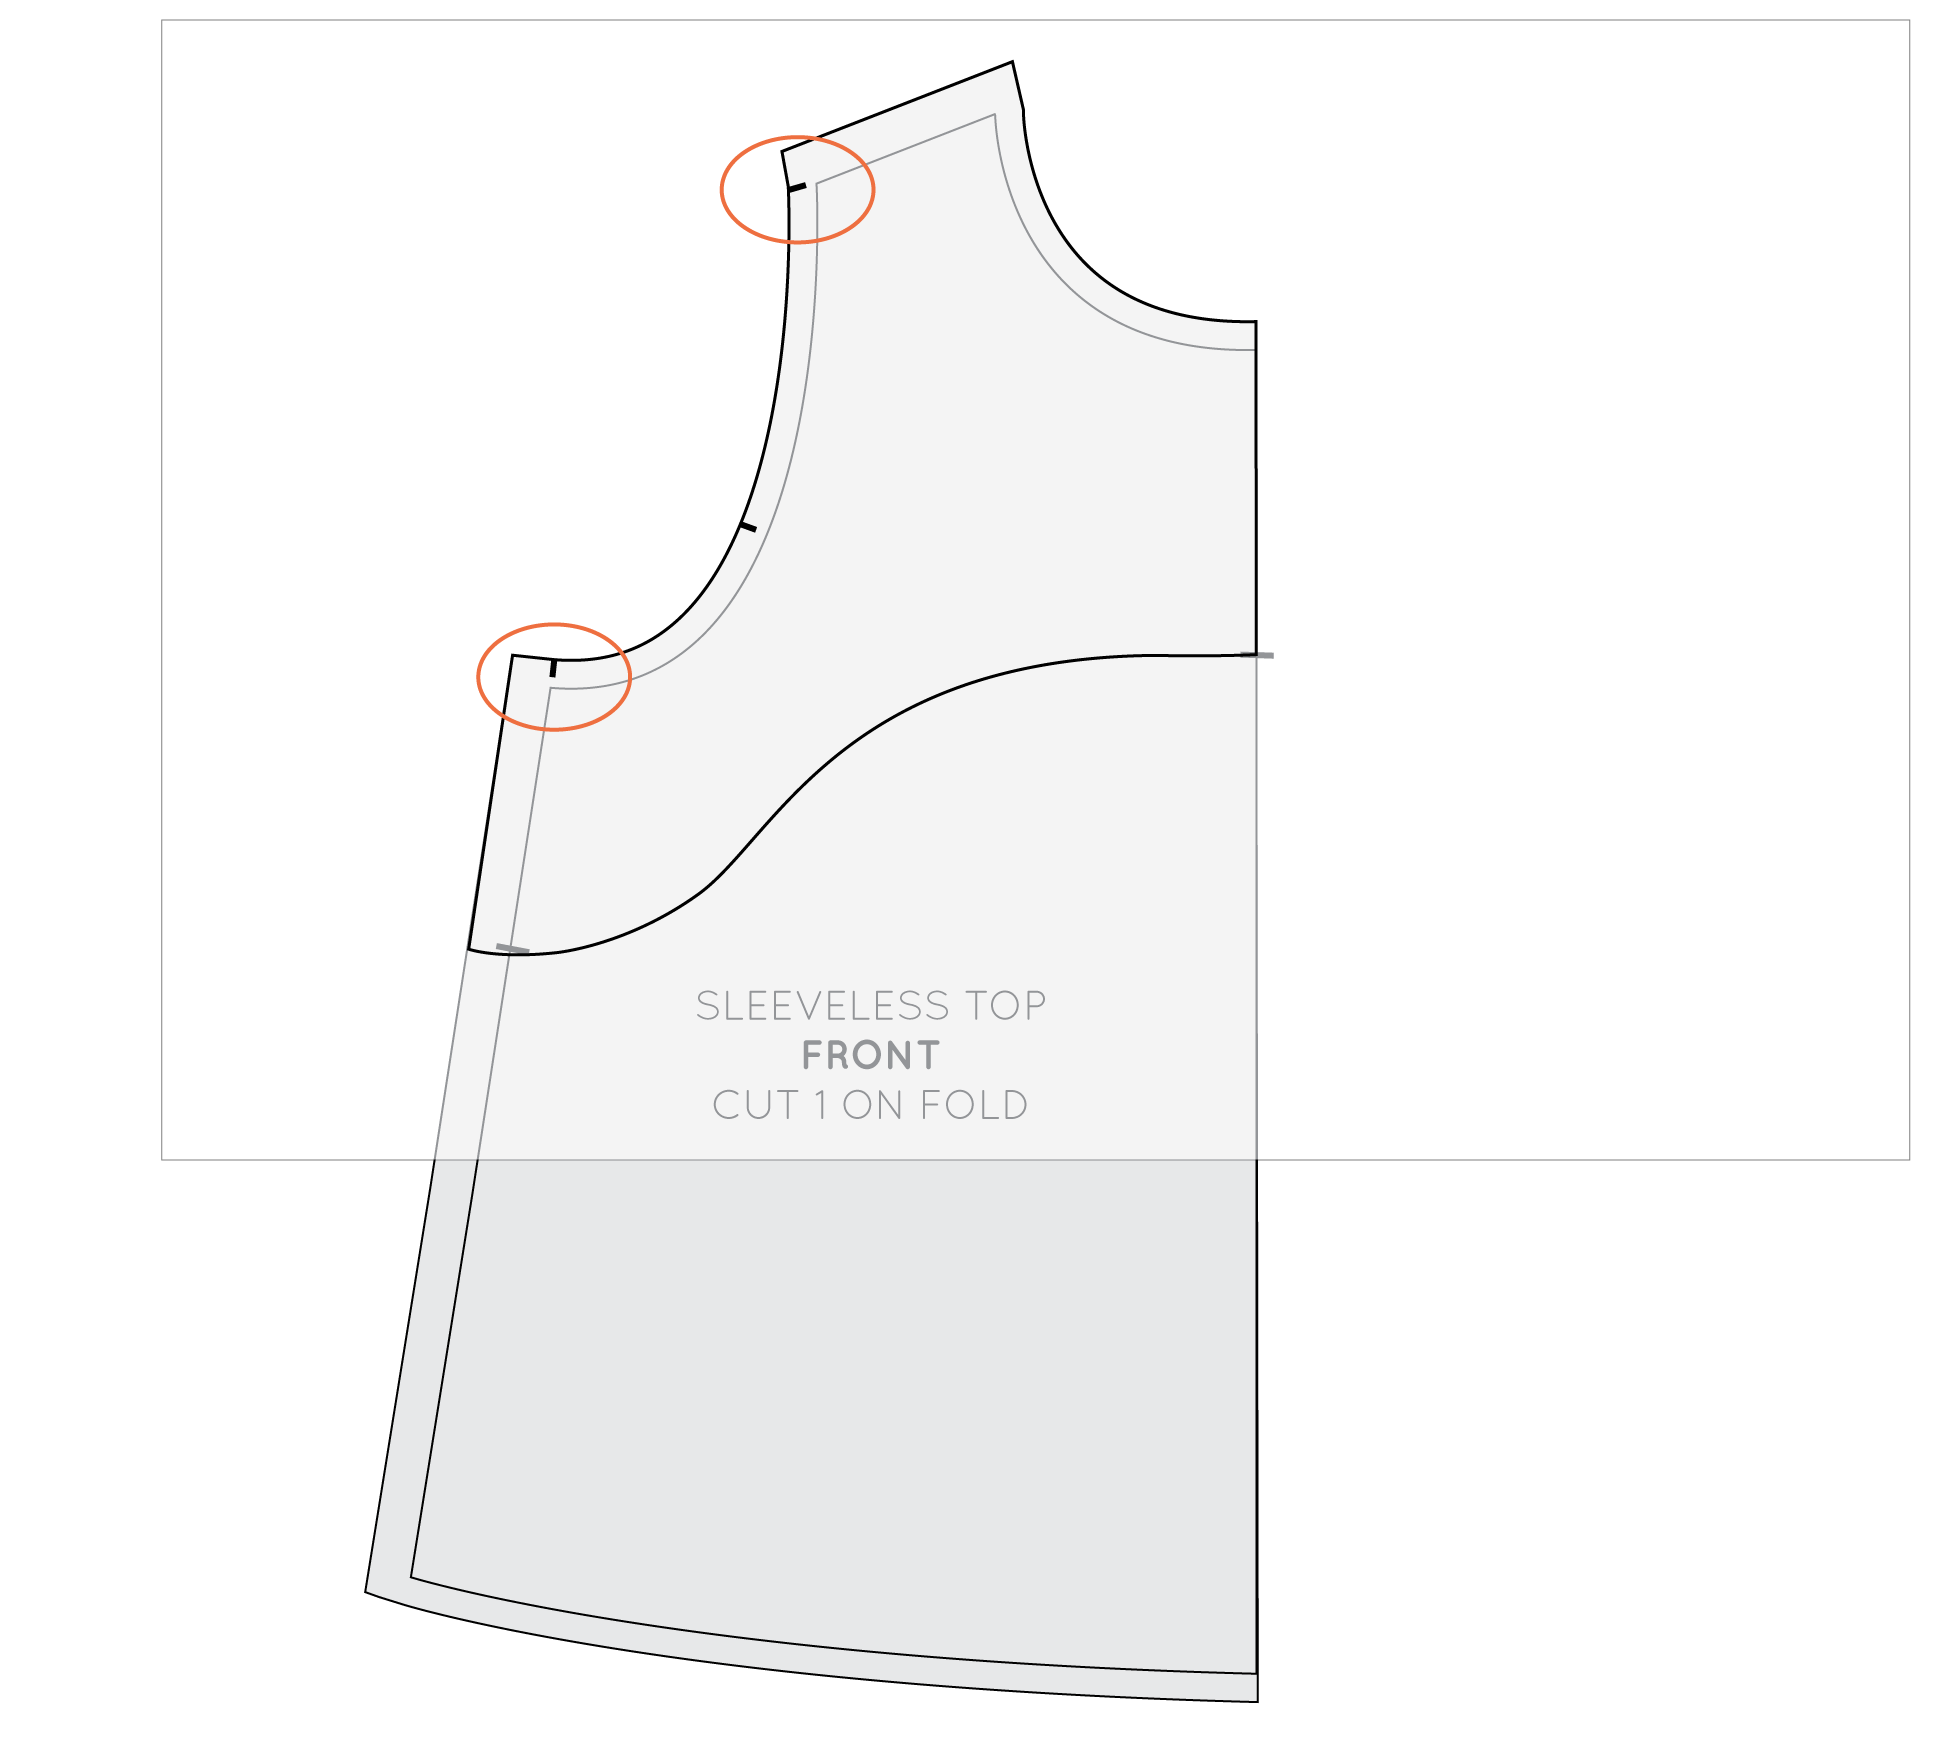 How to: Draft an all-in-facing — In the Folds